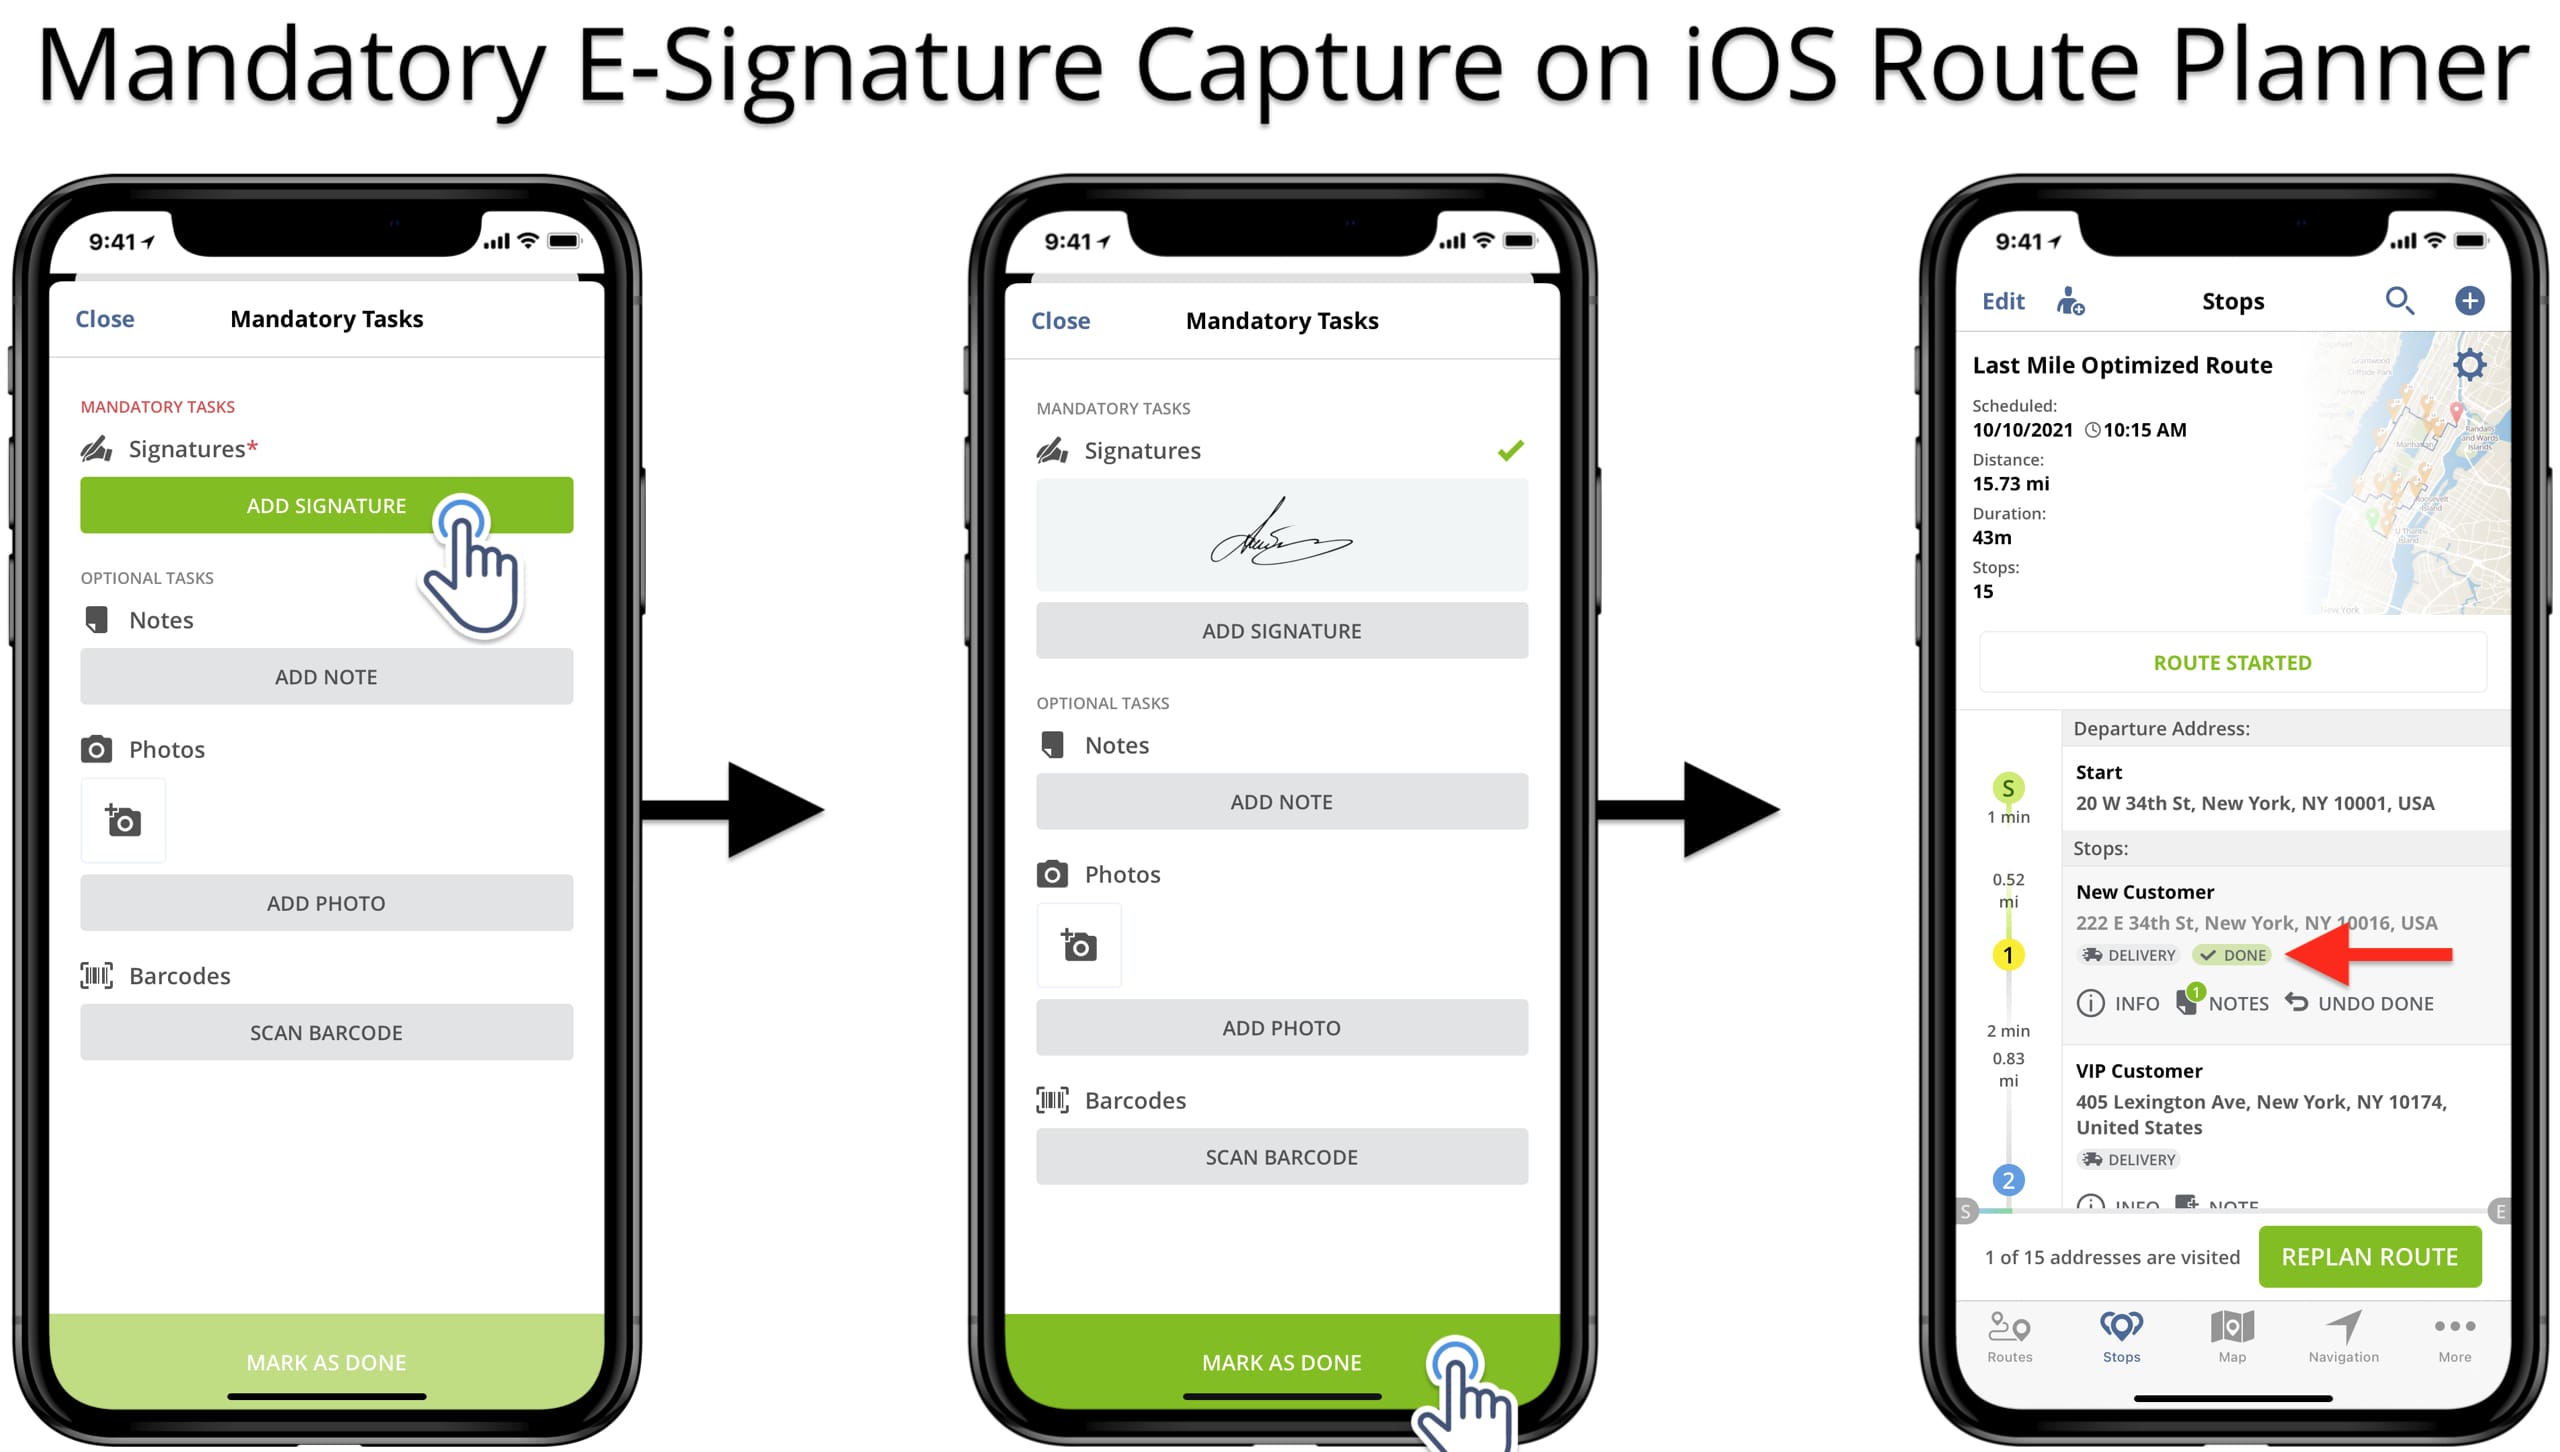 Add mandatory signature to the route stop to complete order or delivery on iOS Route Planner.